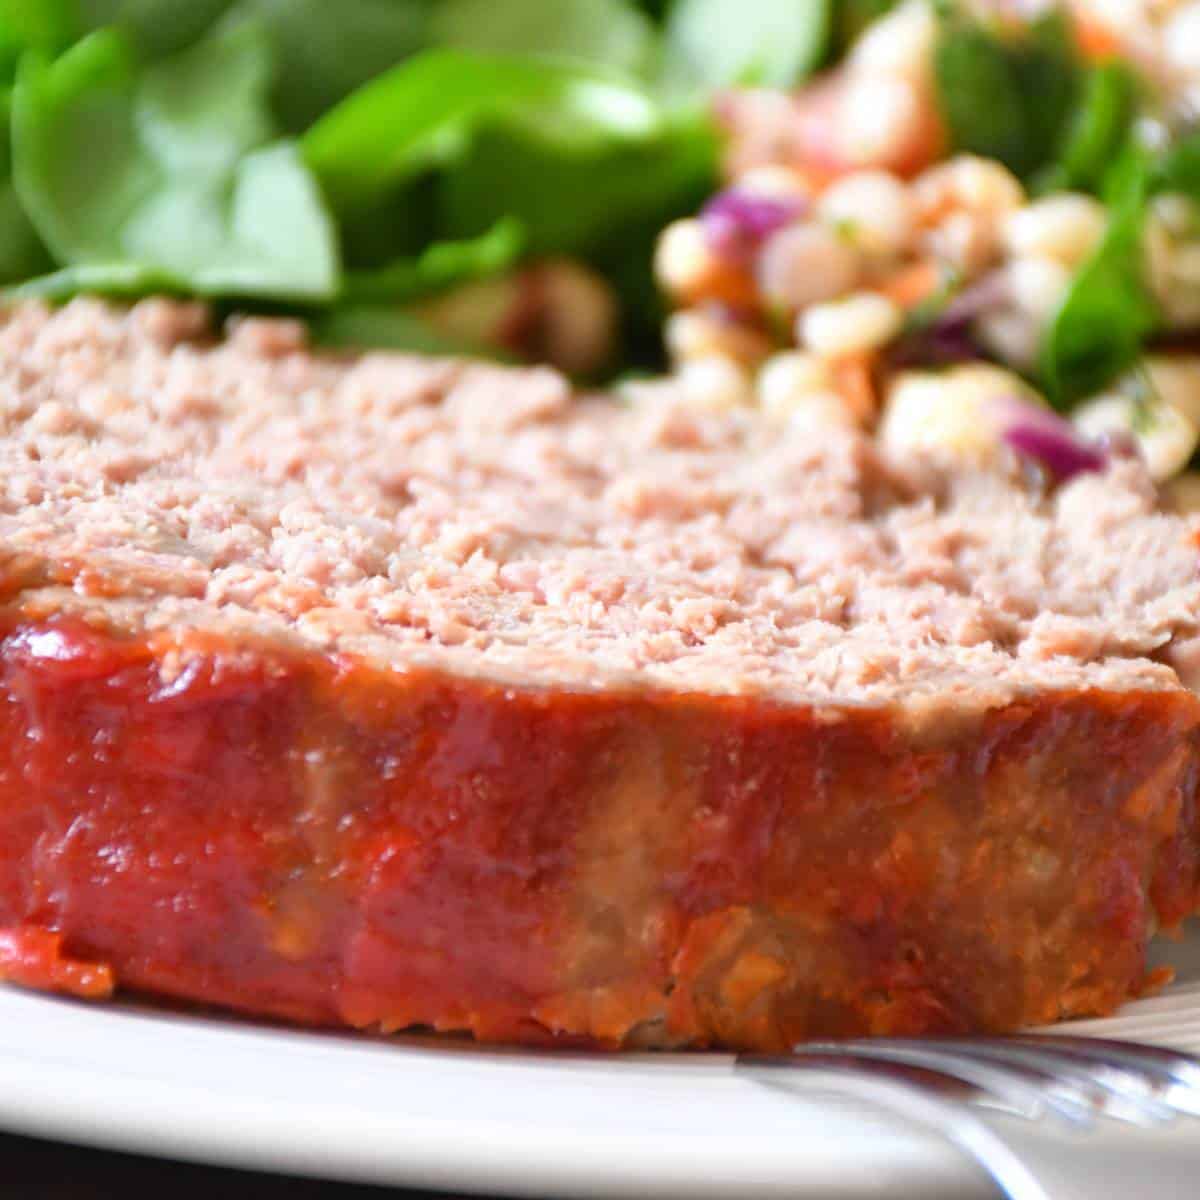 A close-up on a low sodium meatloaf slice served with greens.